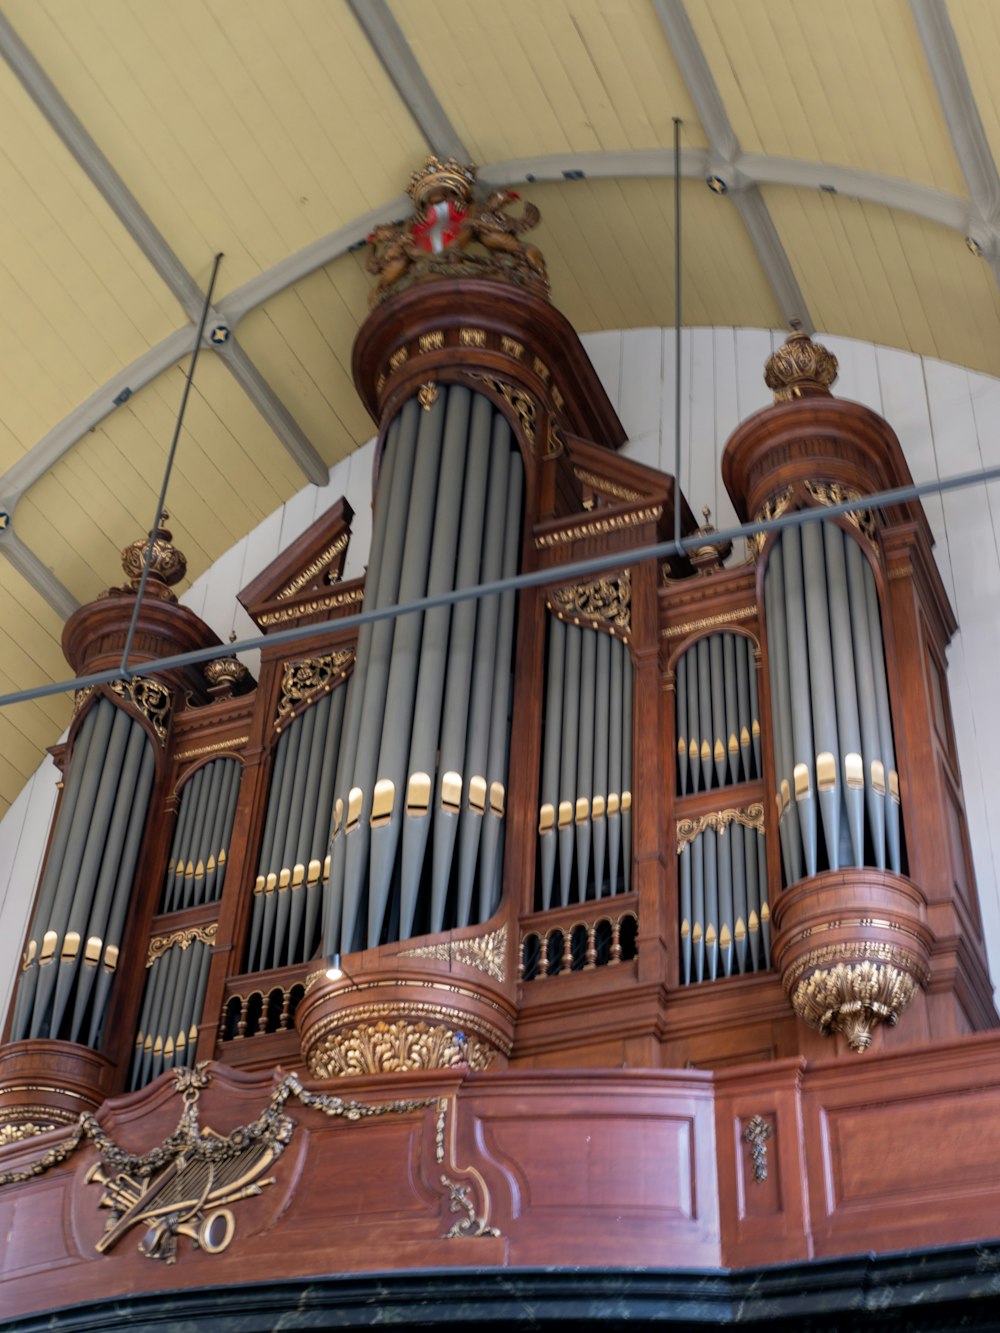 a large pipe organ in a building